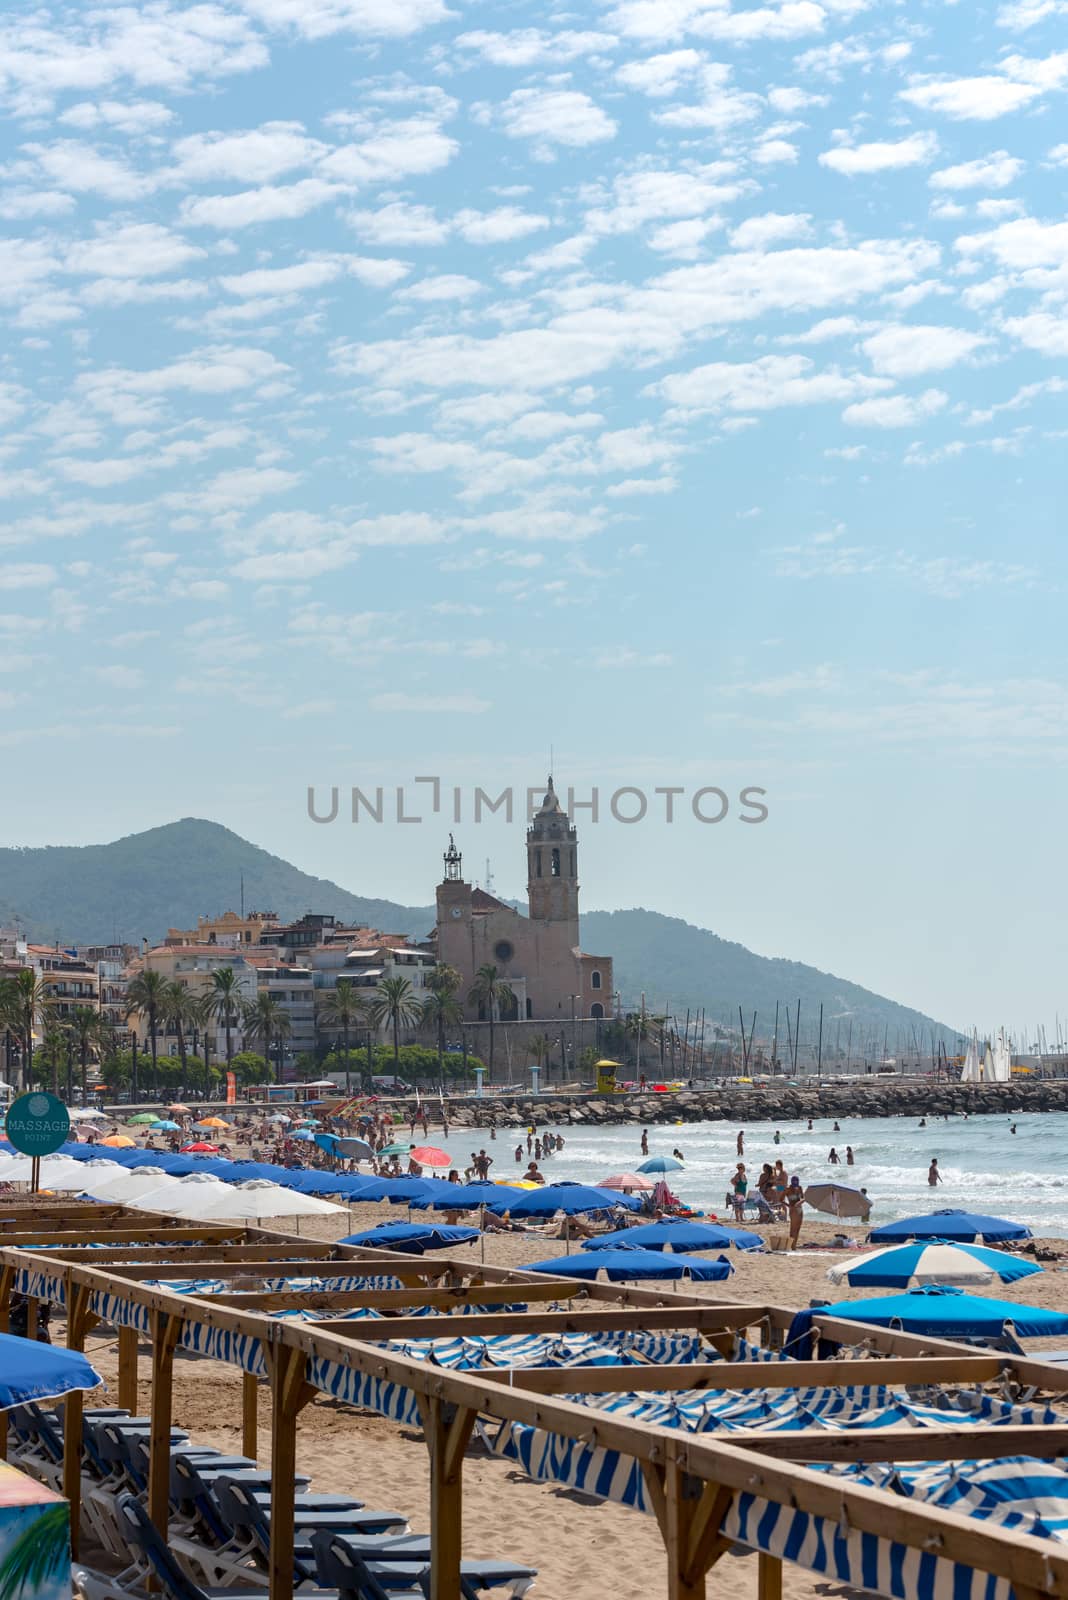 People in the beach in Sitges in summer 2020. by martinscphoto